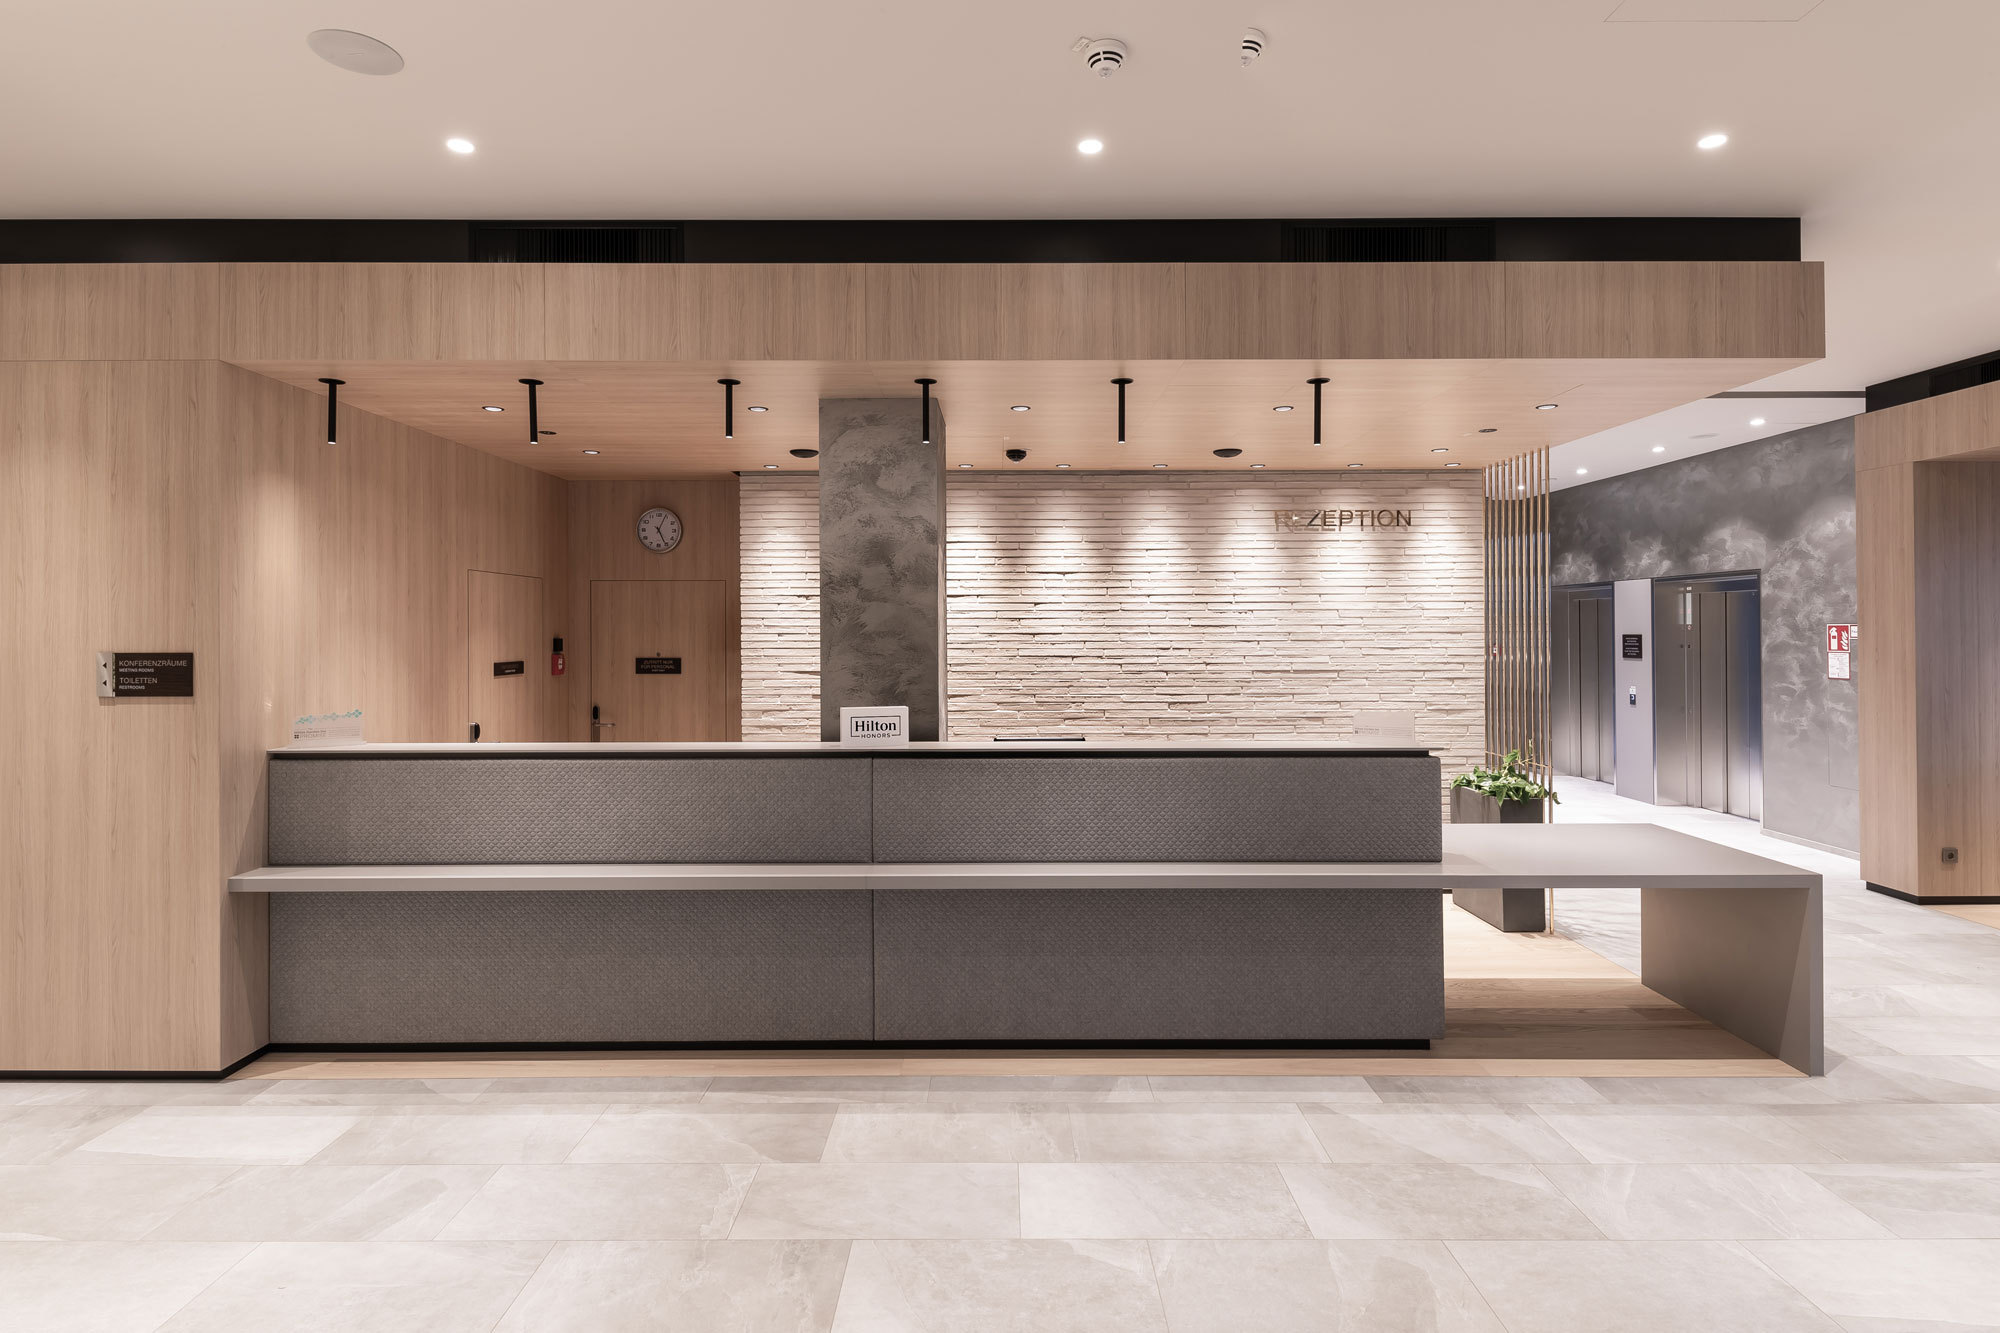 Image of COL EXP 20190211 C68I8674 V01 in The durability and luminosity of Silestone Miami White17 stand out in the design of the new Citadines Eurométropole Strasbourg hotel - Cosentino